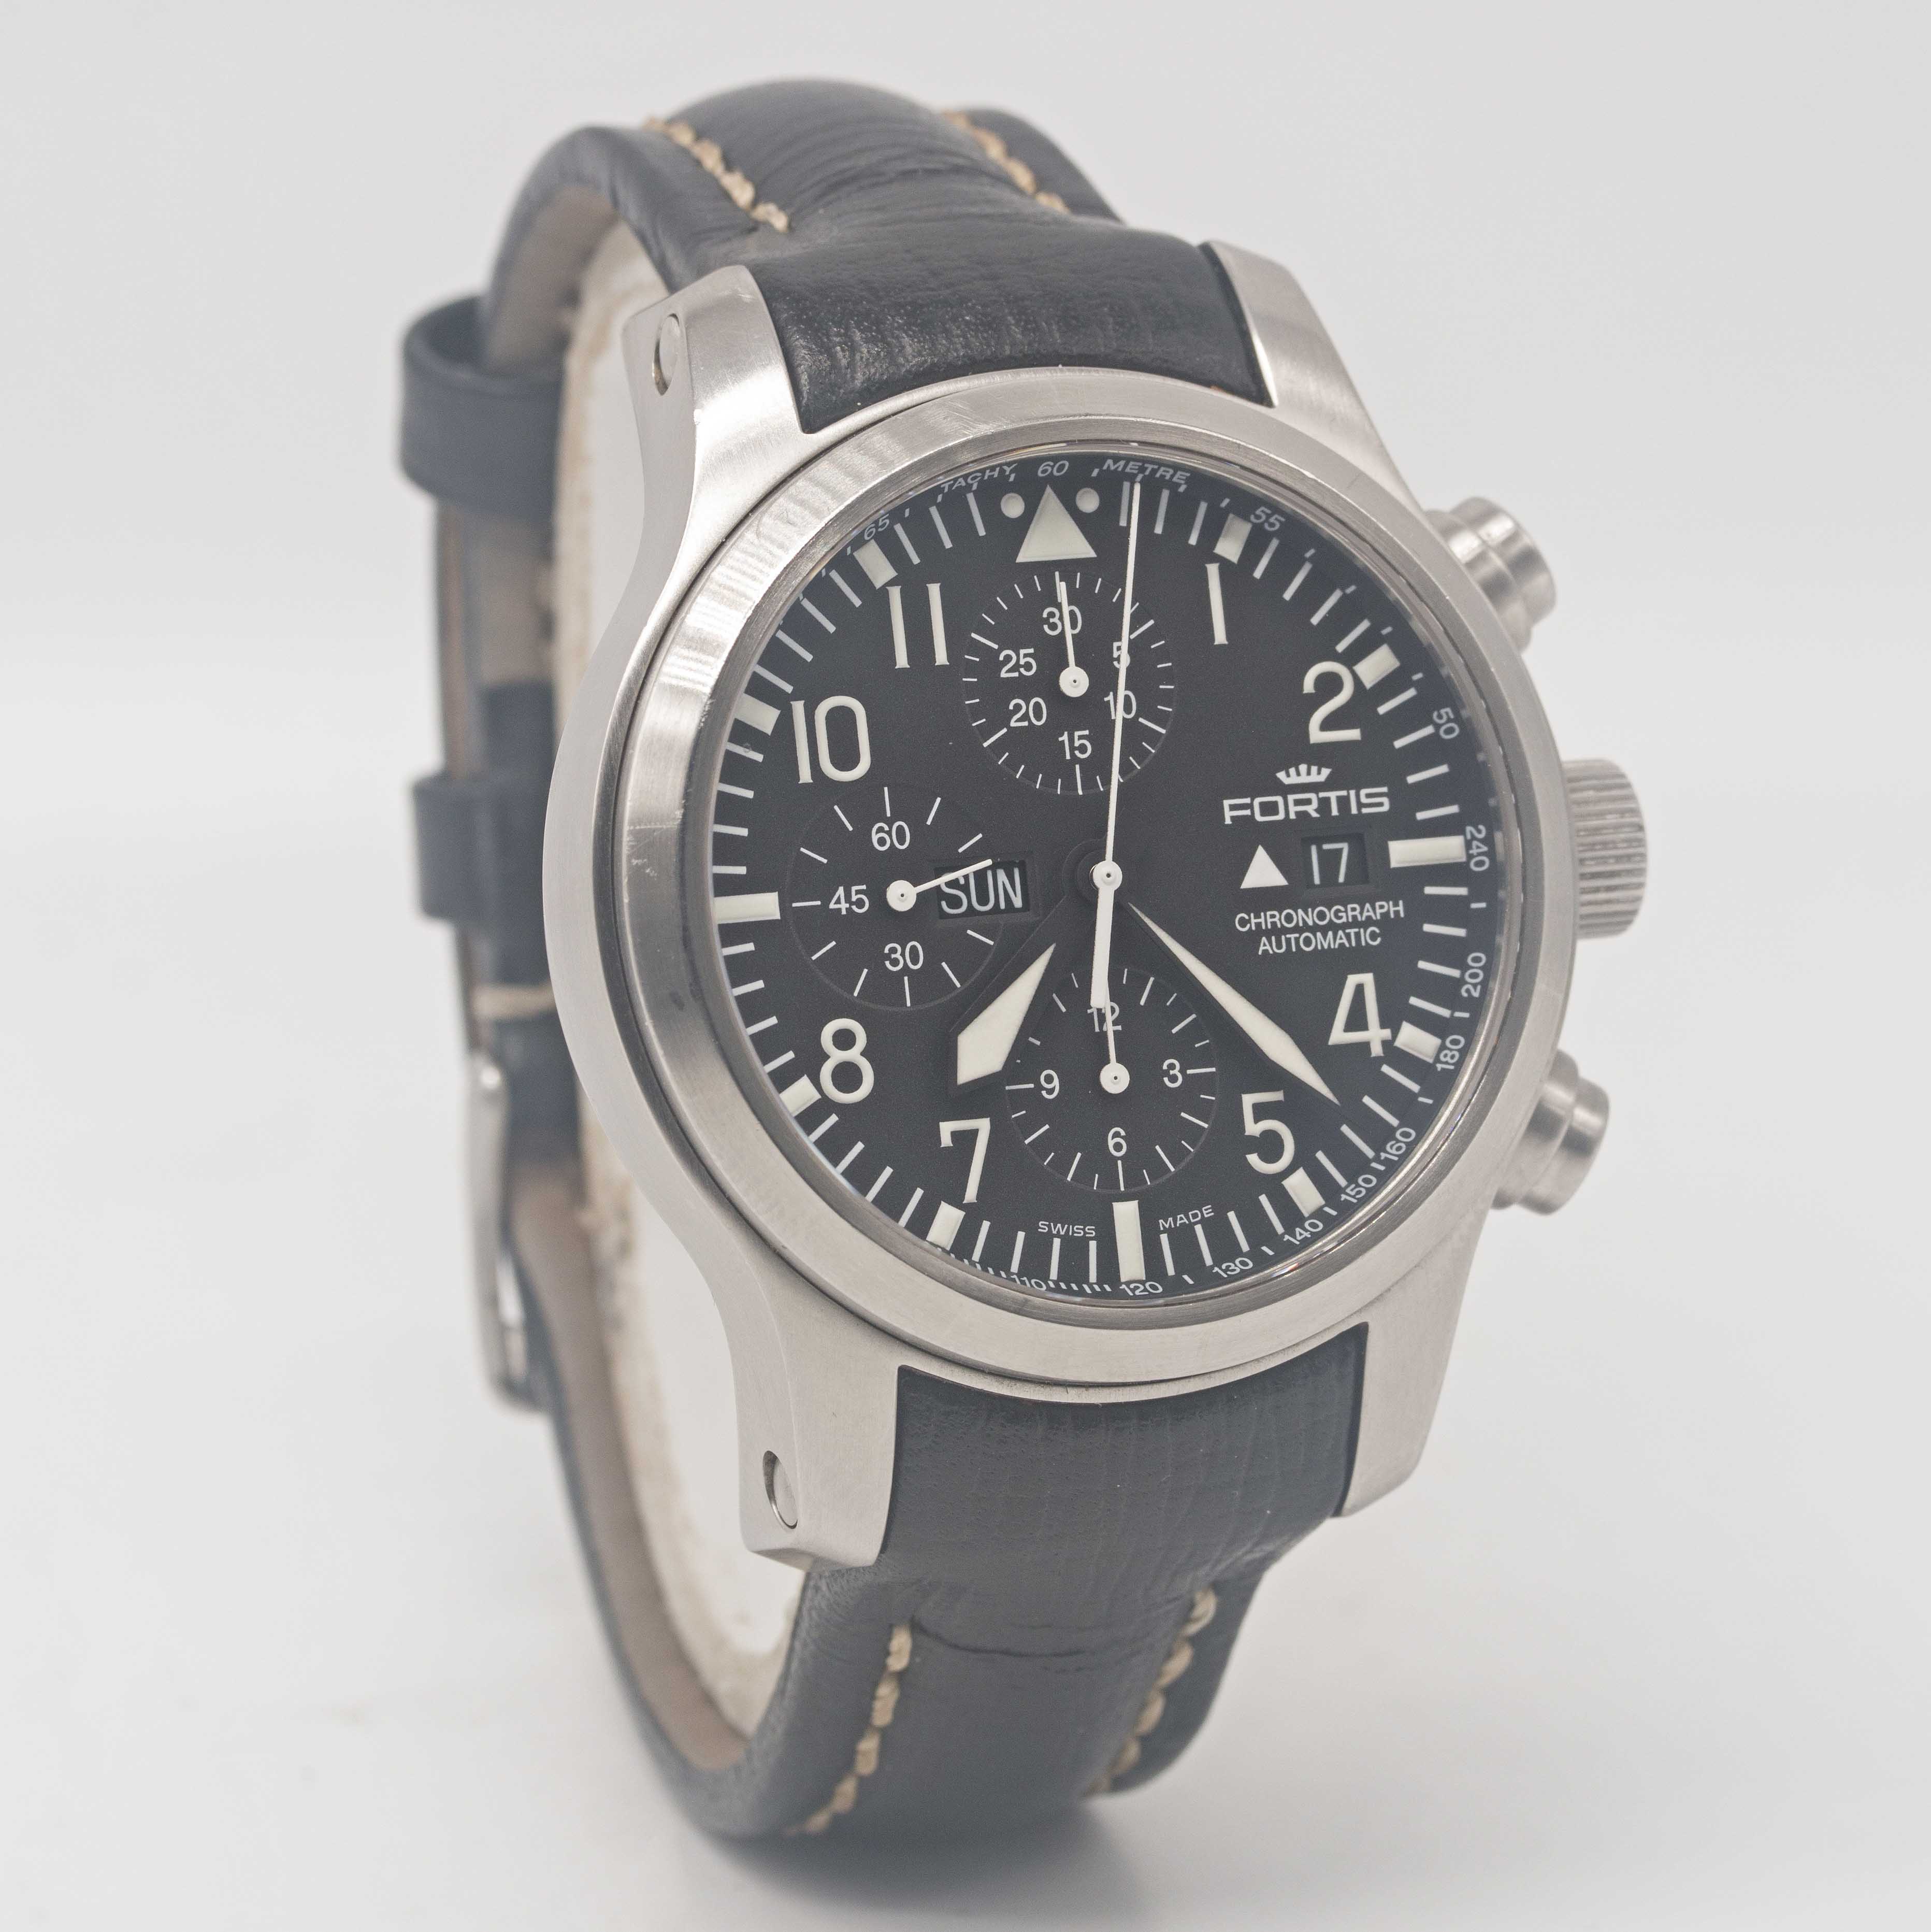 A GENTLEMAN'S STAINLESS STEEL FORTIS B-42 AUTOMATIC CHRONOGRAPH WRIST WATCH DATED 2008, REF. 656. - Image 4 of 6